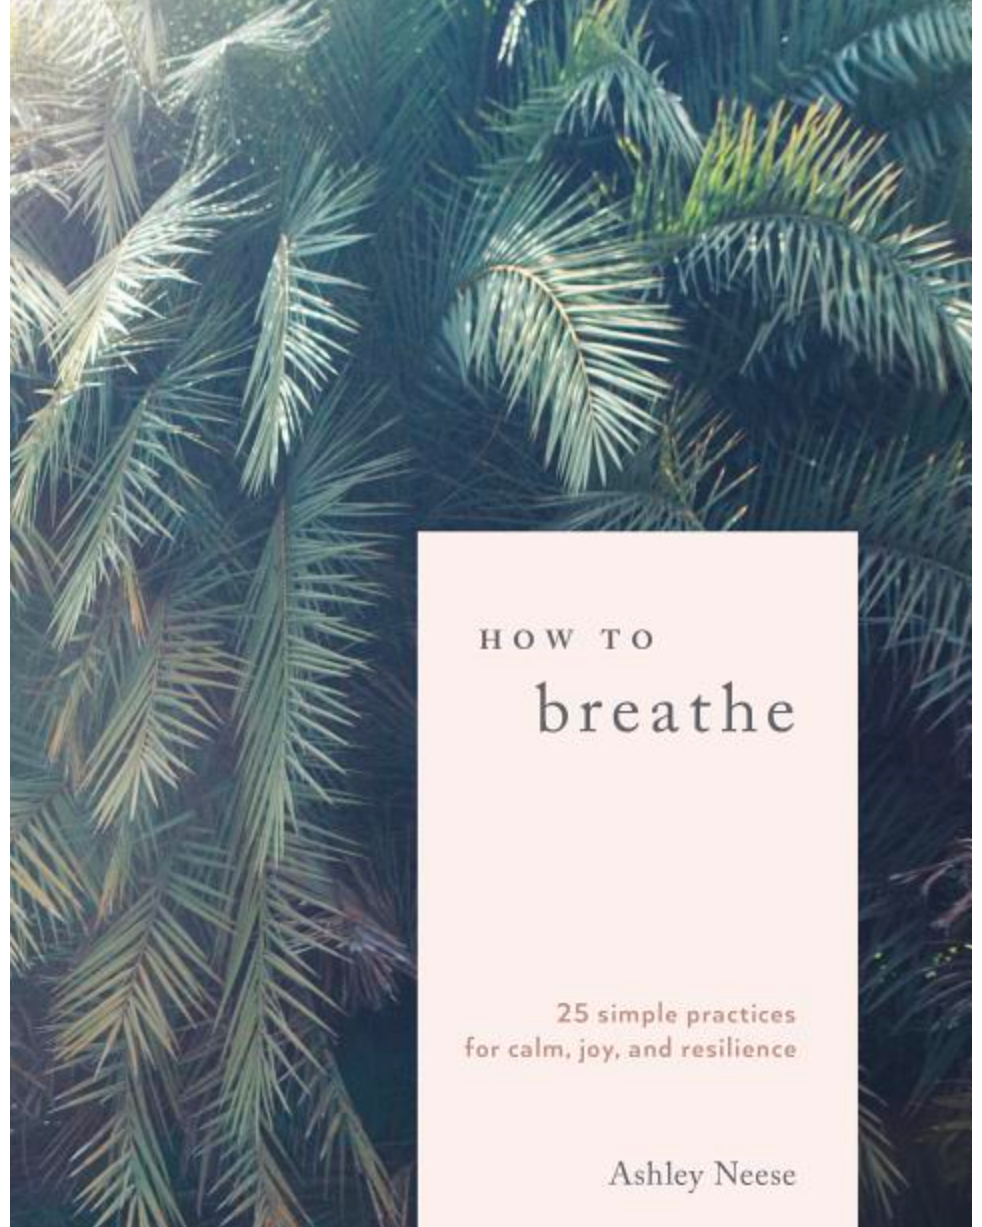 How to Breathe: 25 Simple Practices for Calm, Joy, and Resilience - Gather Goods Co - Raleigh, NC